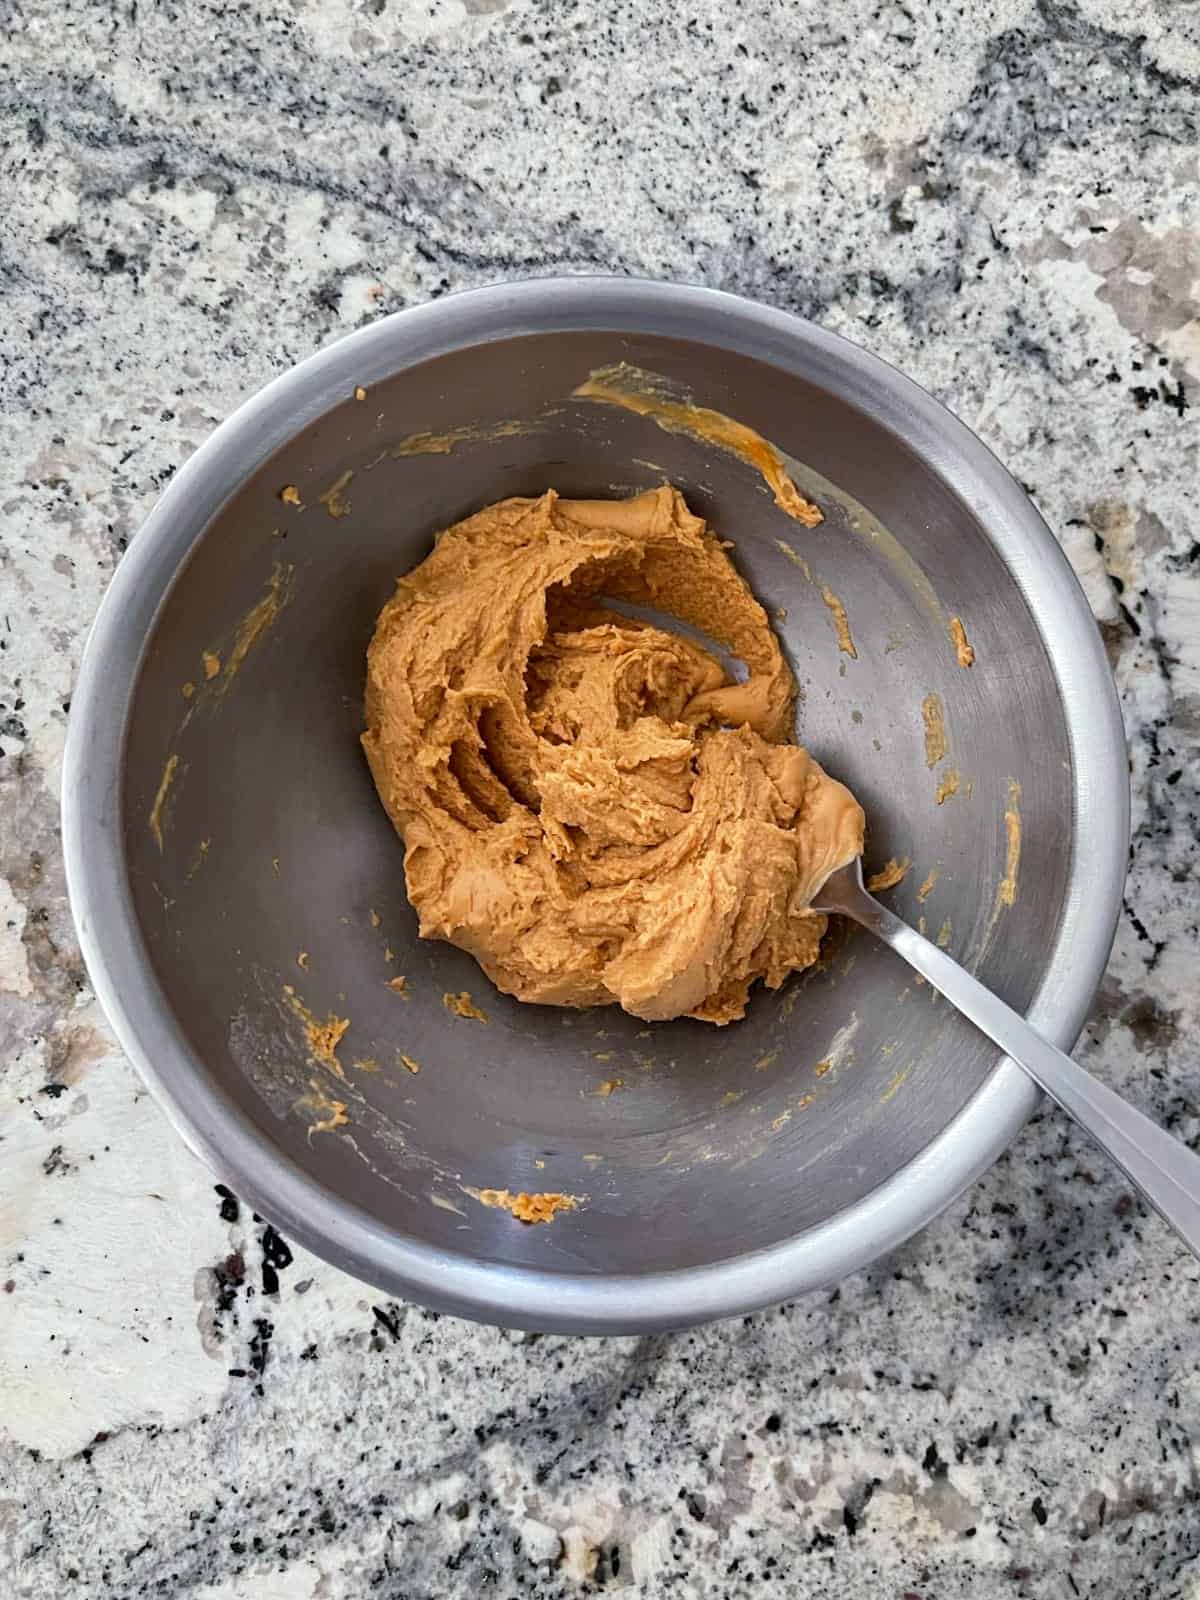 Combining peanut butter powder and water in mixing bowl with fork.